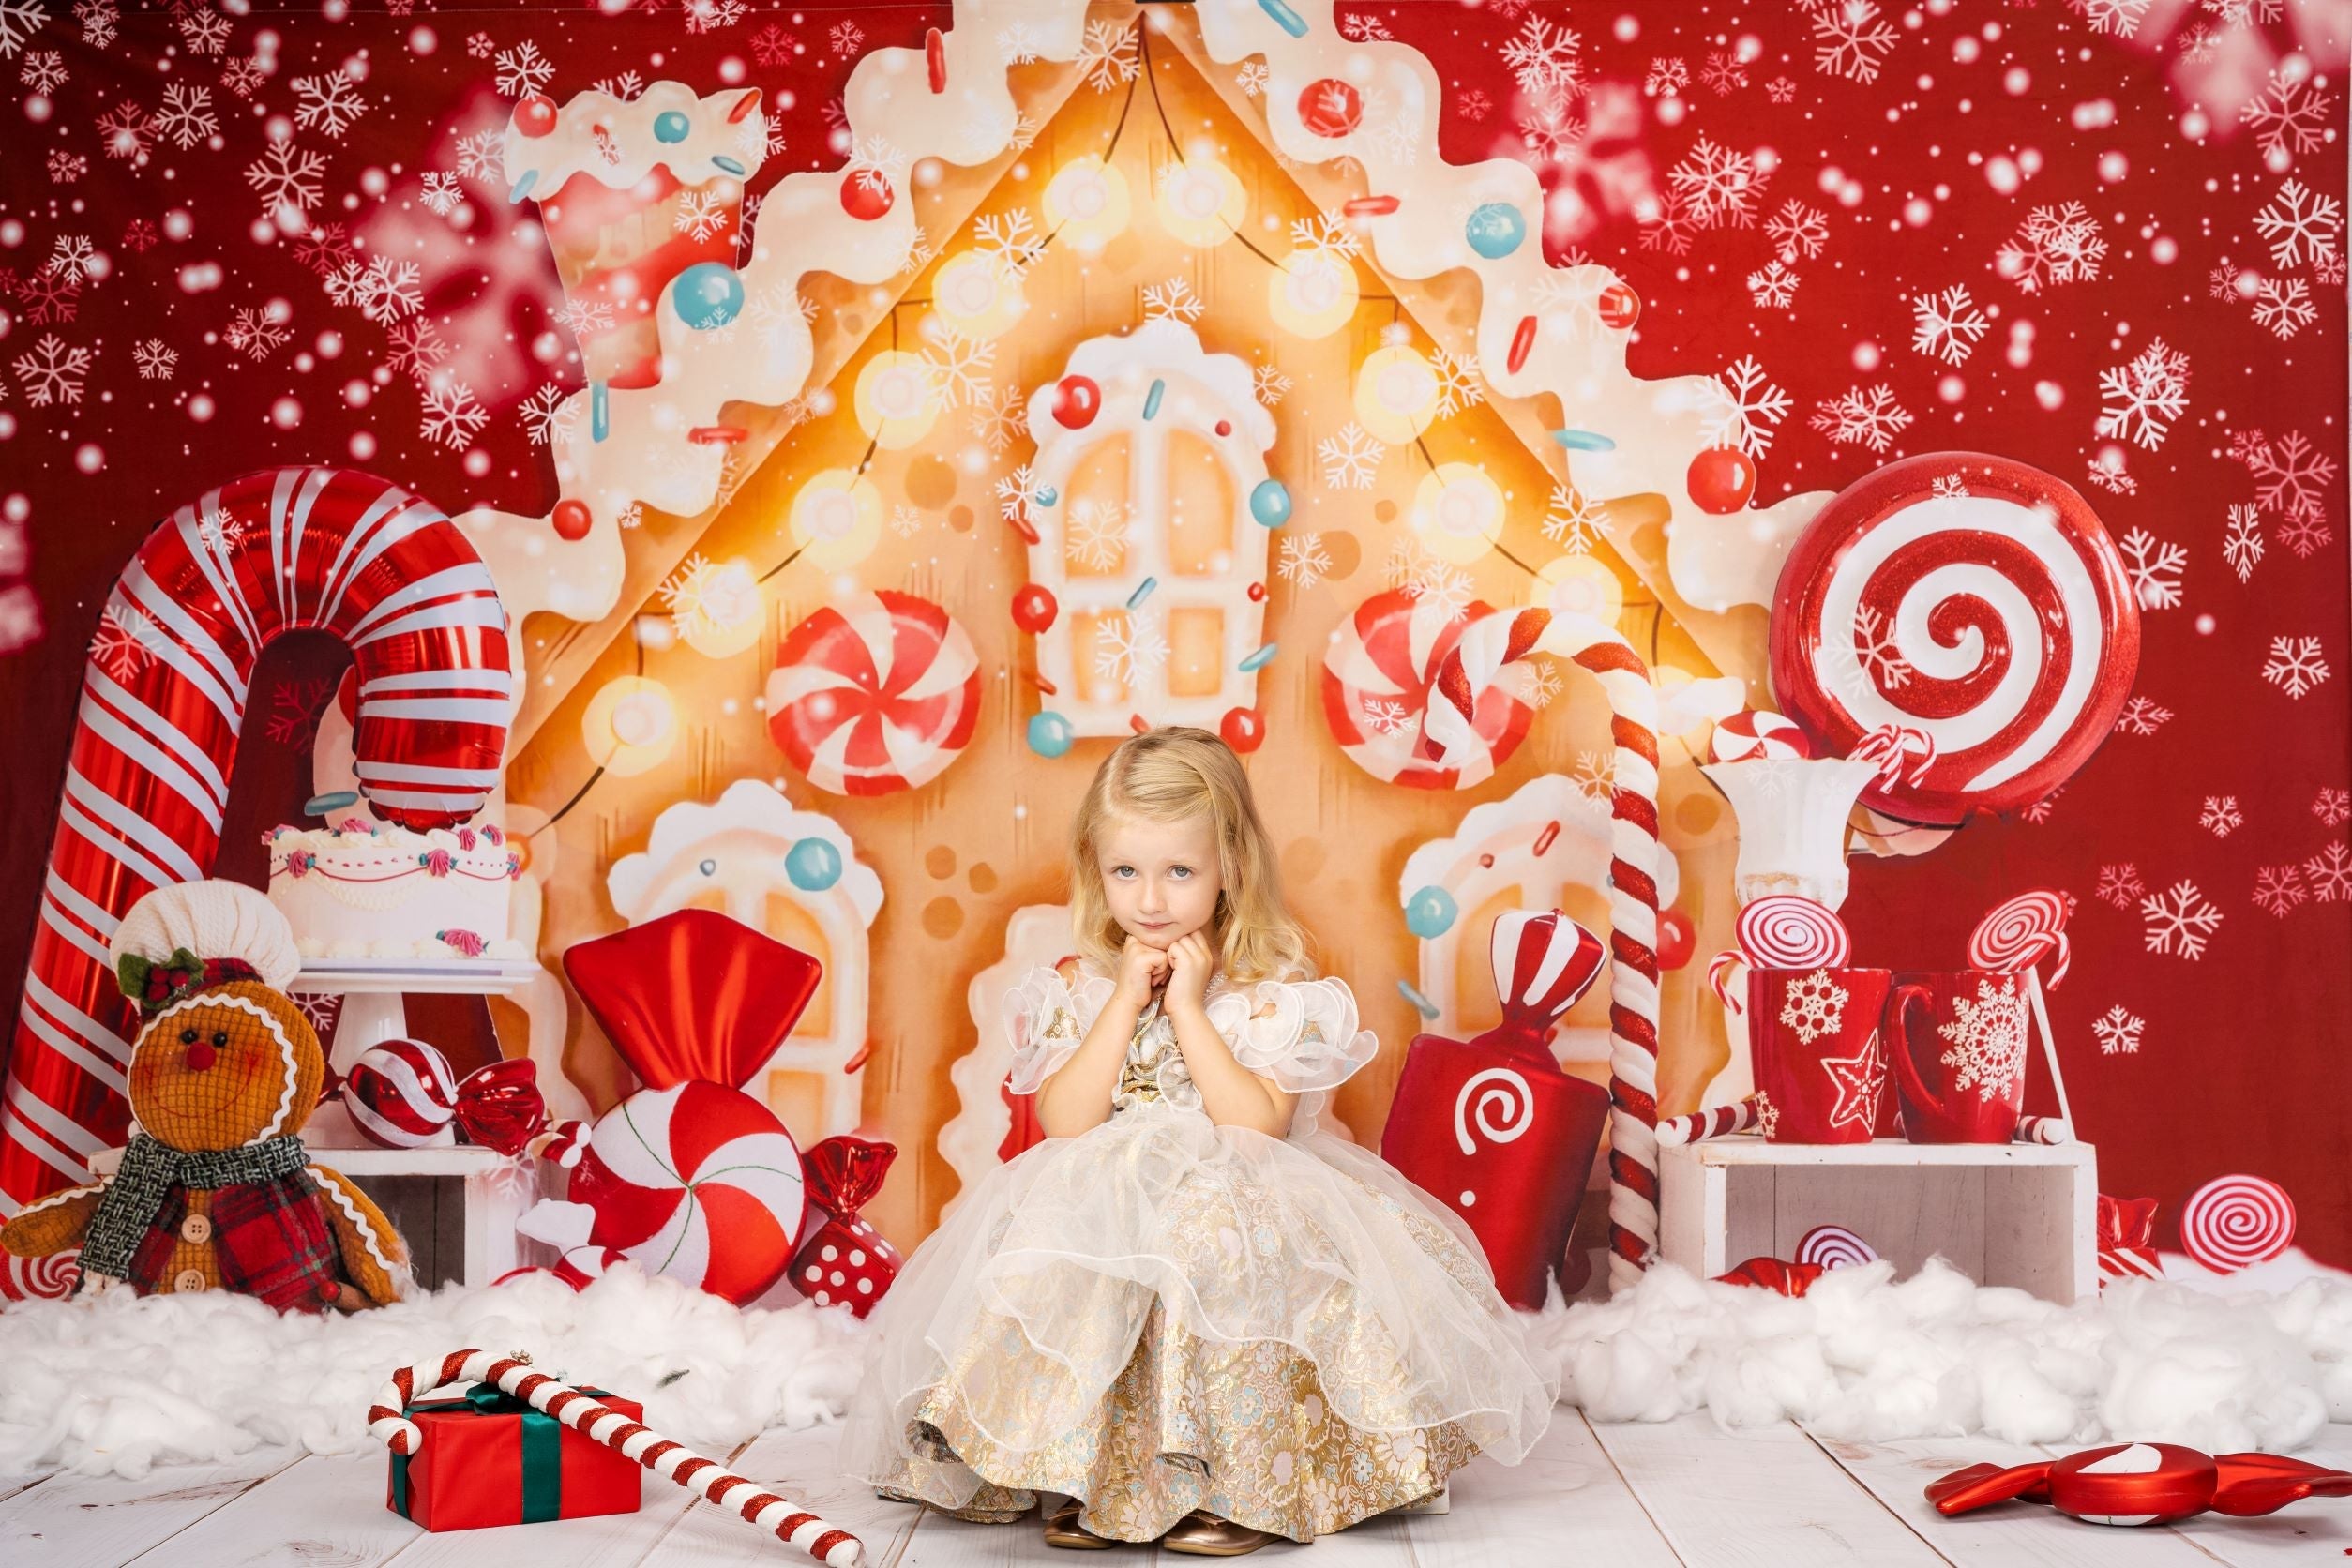 RTS Kate Christmas Backdrop Gingerbread House Candy for Photography